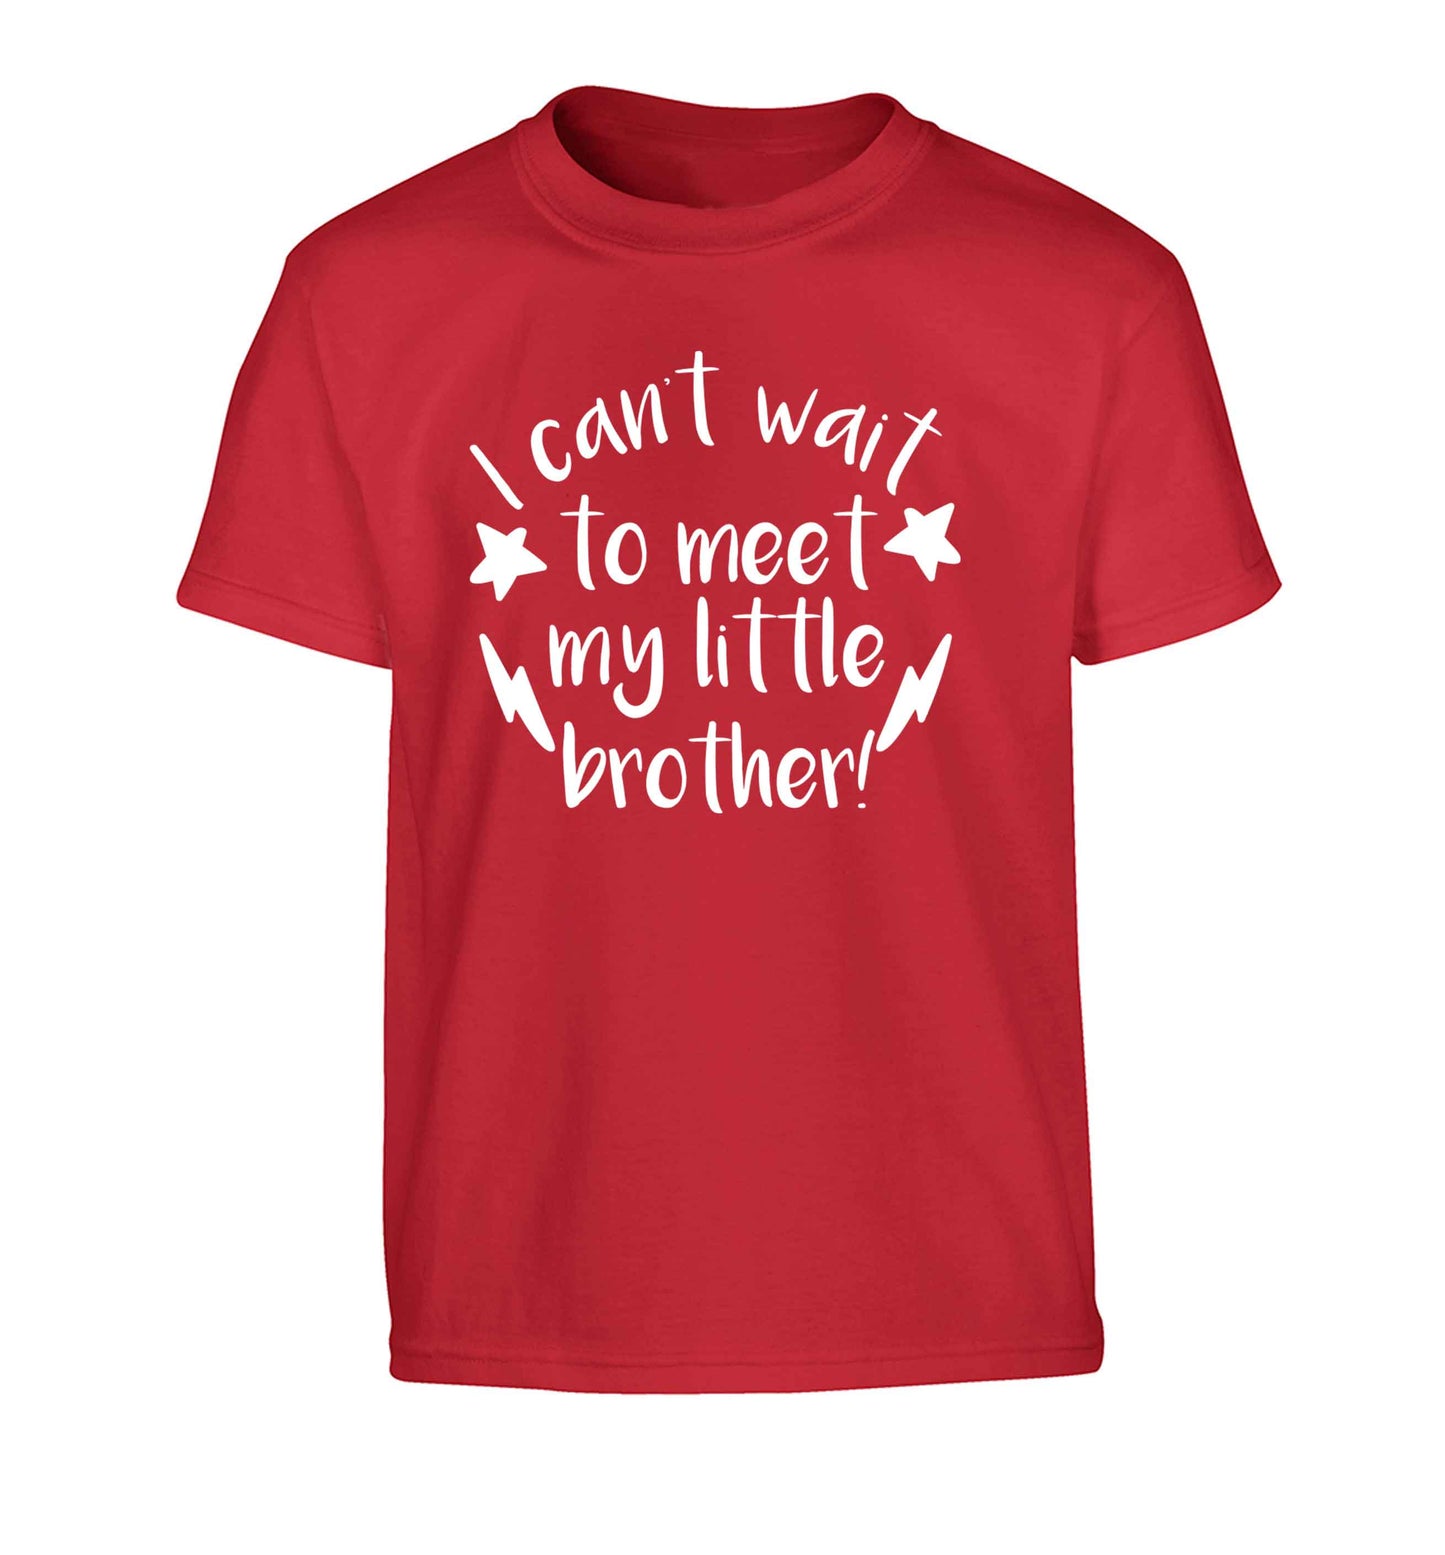 I can't wait to meet my sister! Children's red Tshirt 12-13 Years